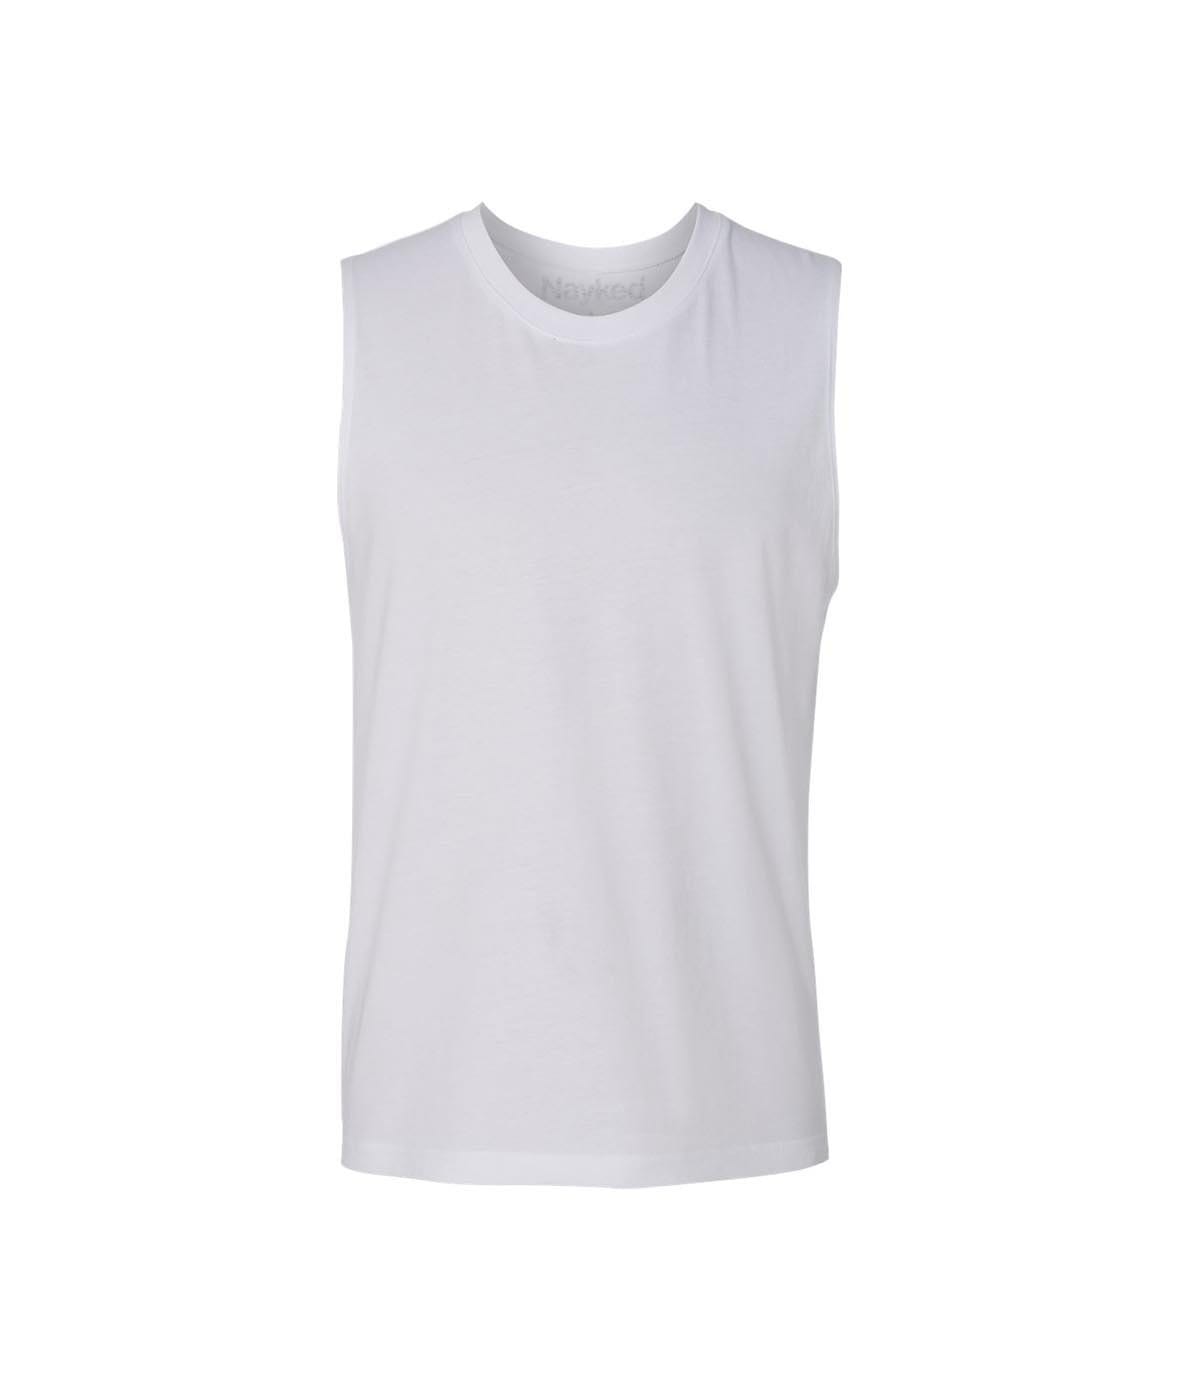 Ridiculously Soft Mens Muscle Tank Top ...